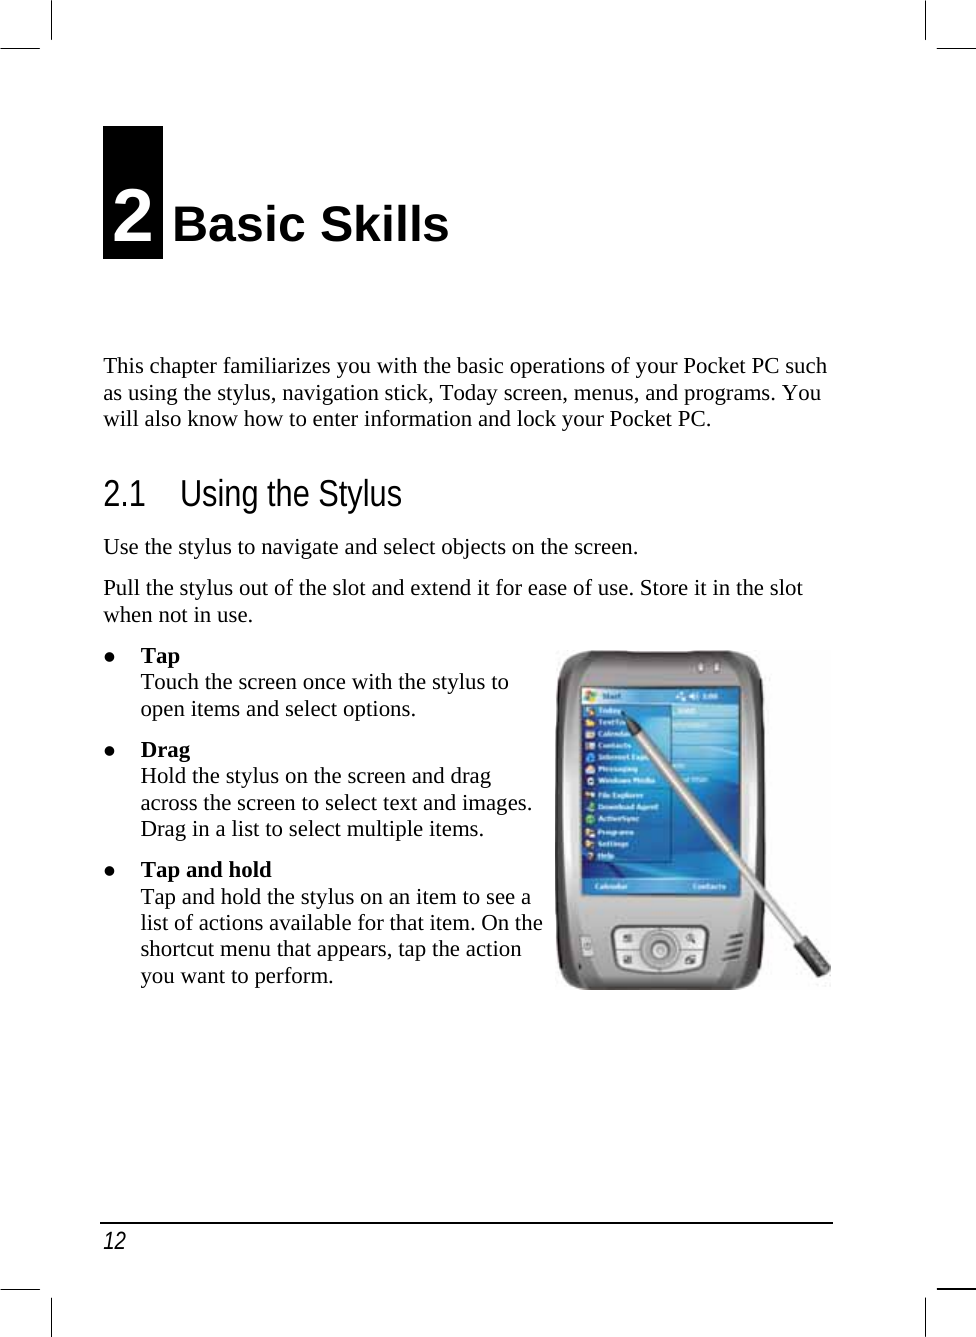  12 2 Basic Skills This chapter familiarizes you with the basic operations of your Pocket PC such as using the stylus, navigation stick, Today screen, menus, and programs. You will also know how to enter information and lock your Pocket PC. 2.1  Using the Stylus Use the stylus to navigate and select objects on the screen. Pull the stylus out of the slot and extend it for ease of use. Store it in the slot when not in use.   Tap Touch the screen once with the stylus to open items and select options.   Drag Hold the stylus on the screen and drag across the screen to select text and images. Drag in a list to select multiple items.   Tap and hold Tap and hold the stylus on an item to see a list of actions available for that item. On the shortcut menu that appears, tap the action you want to perform.      